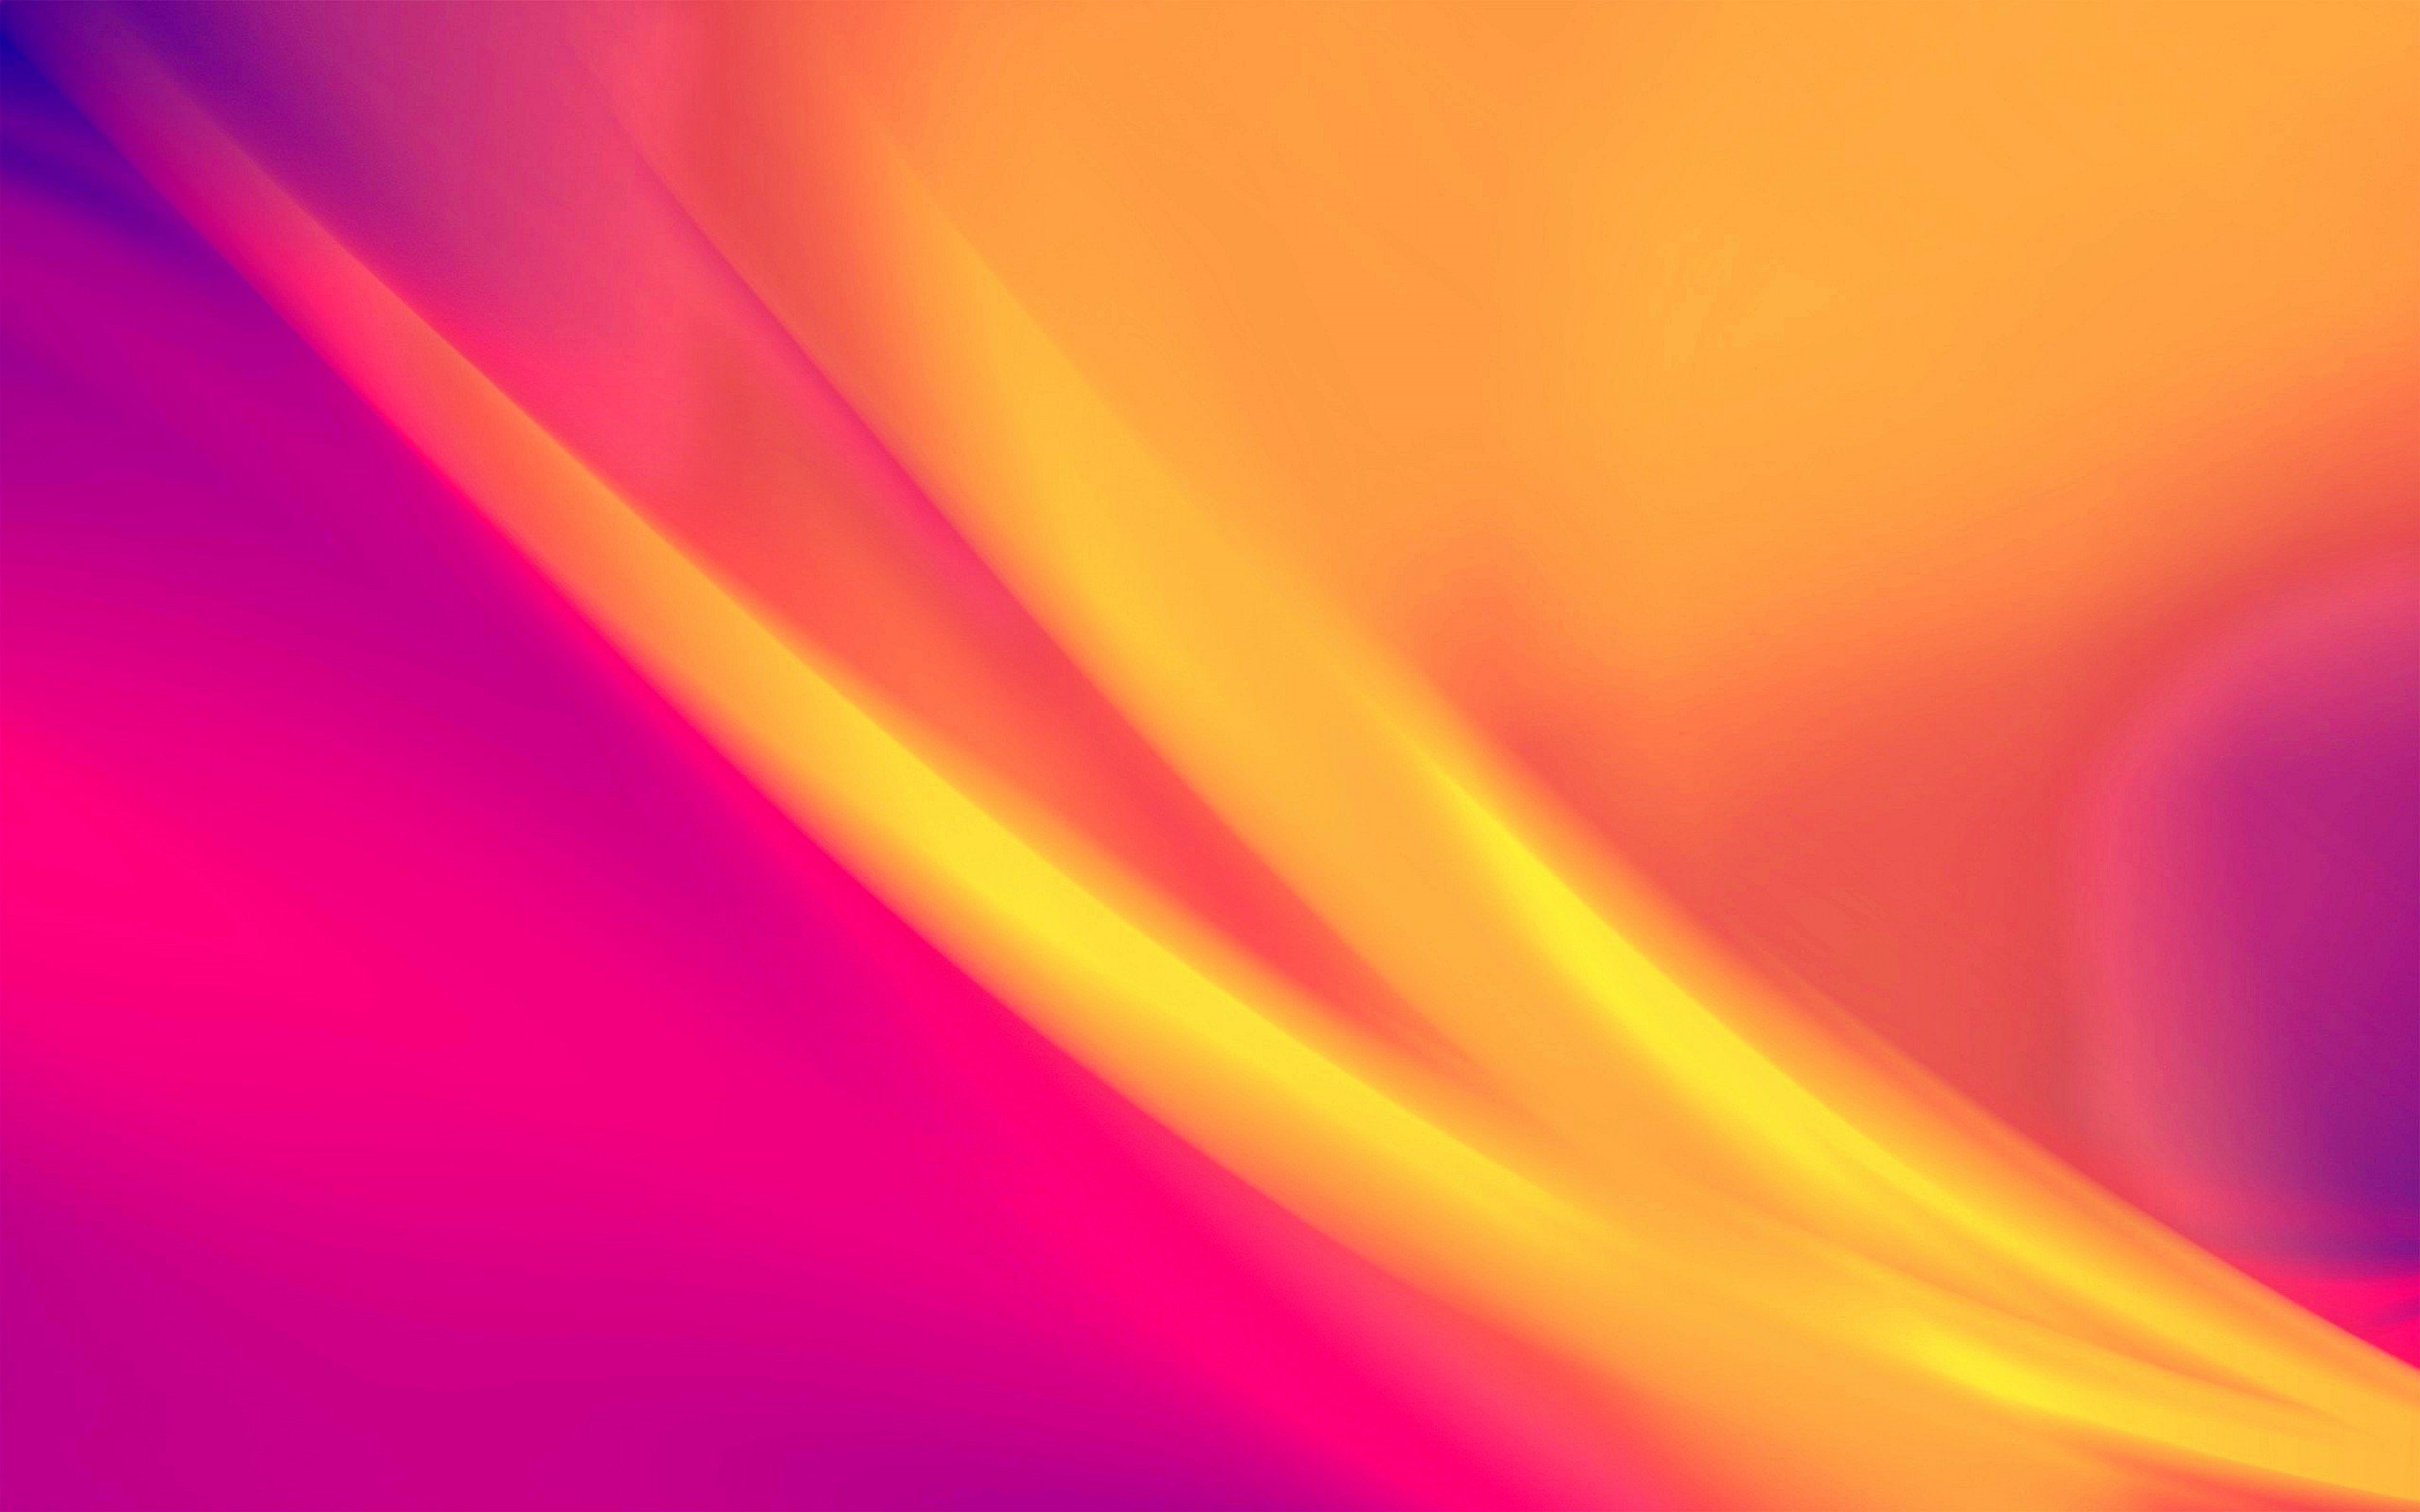  757777 Bright Color Backgrounds Wallpapers Abstract Backgrounds